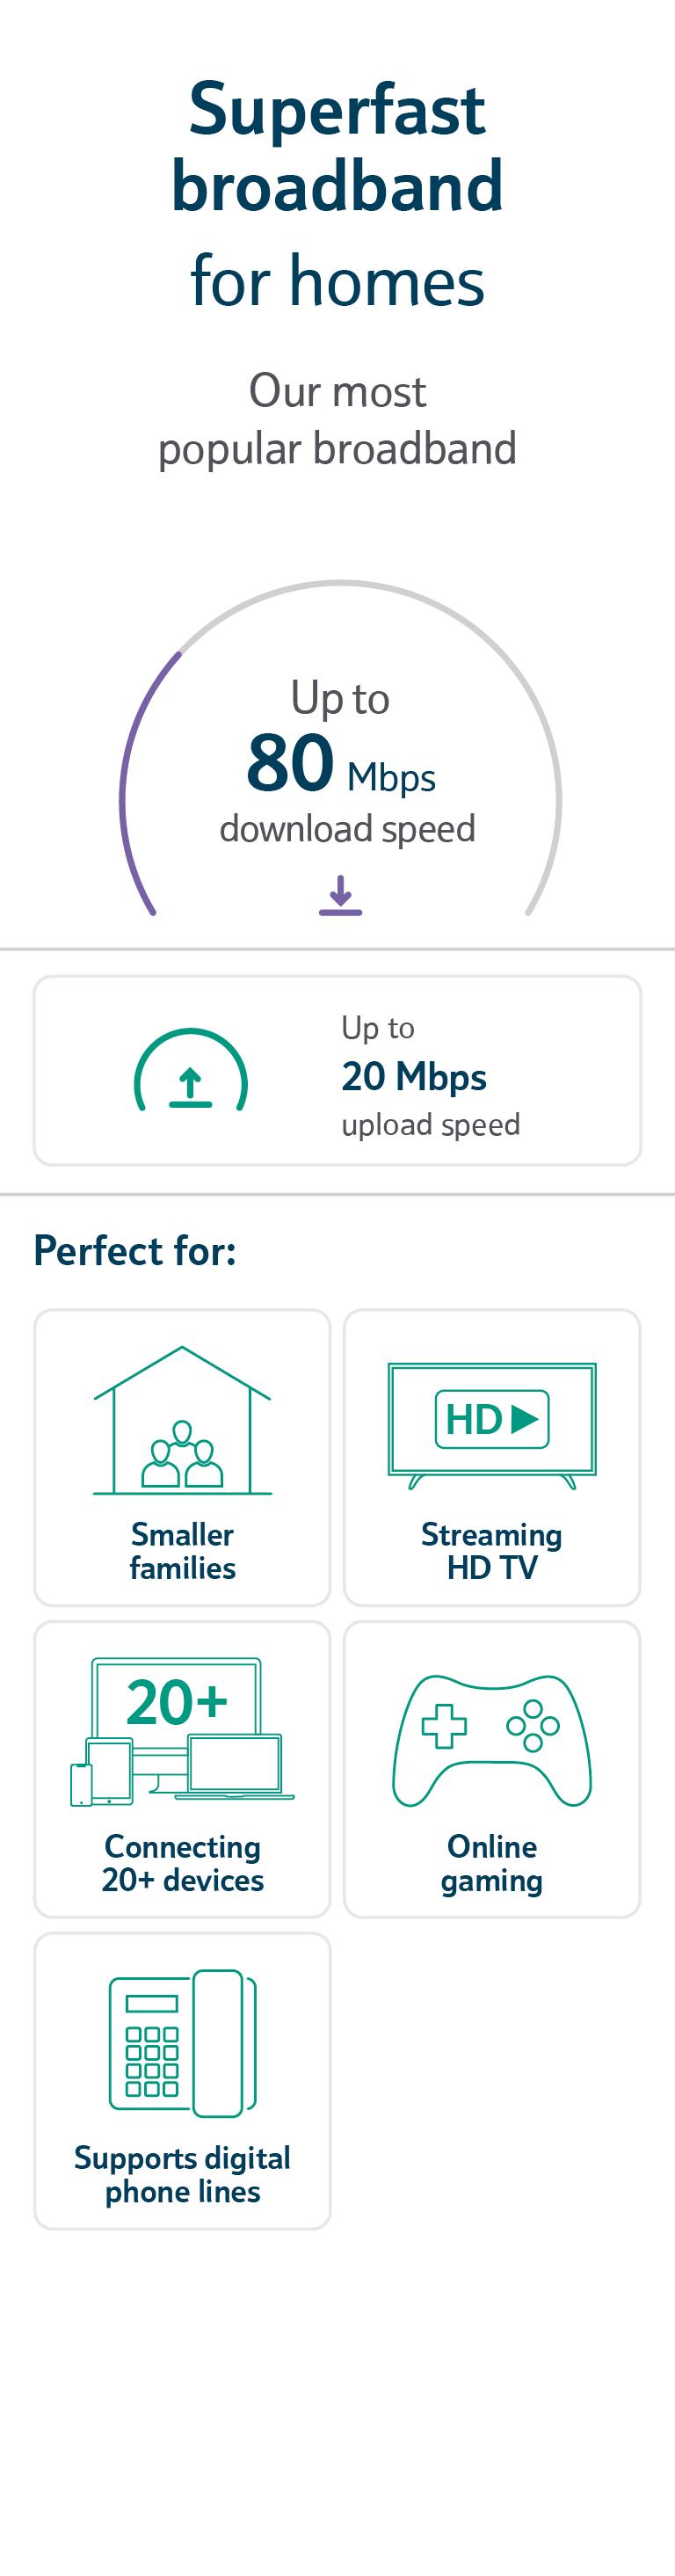 Superfast broadband for homes comparison card with icons